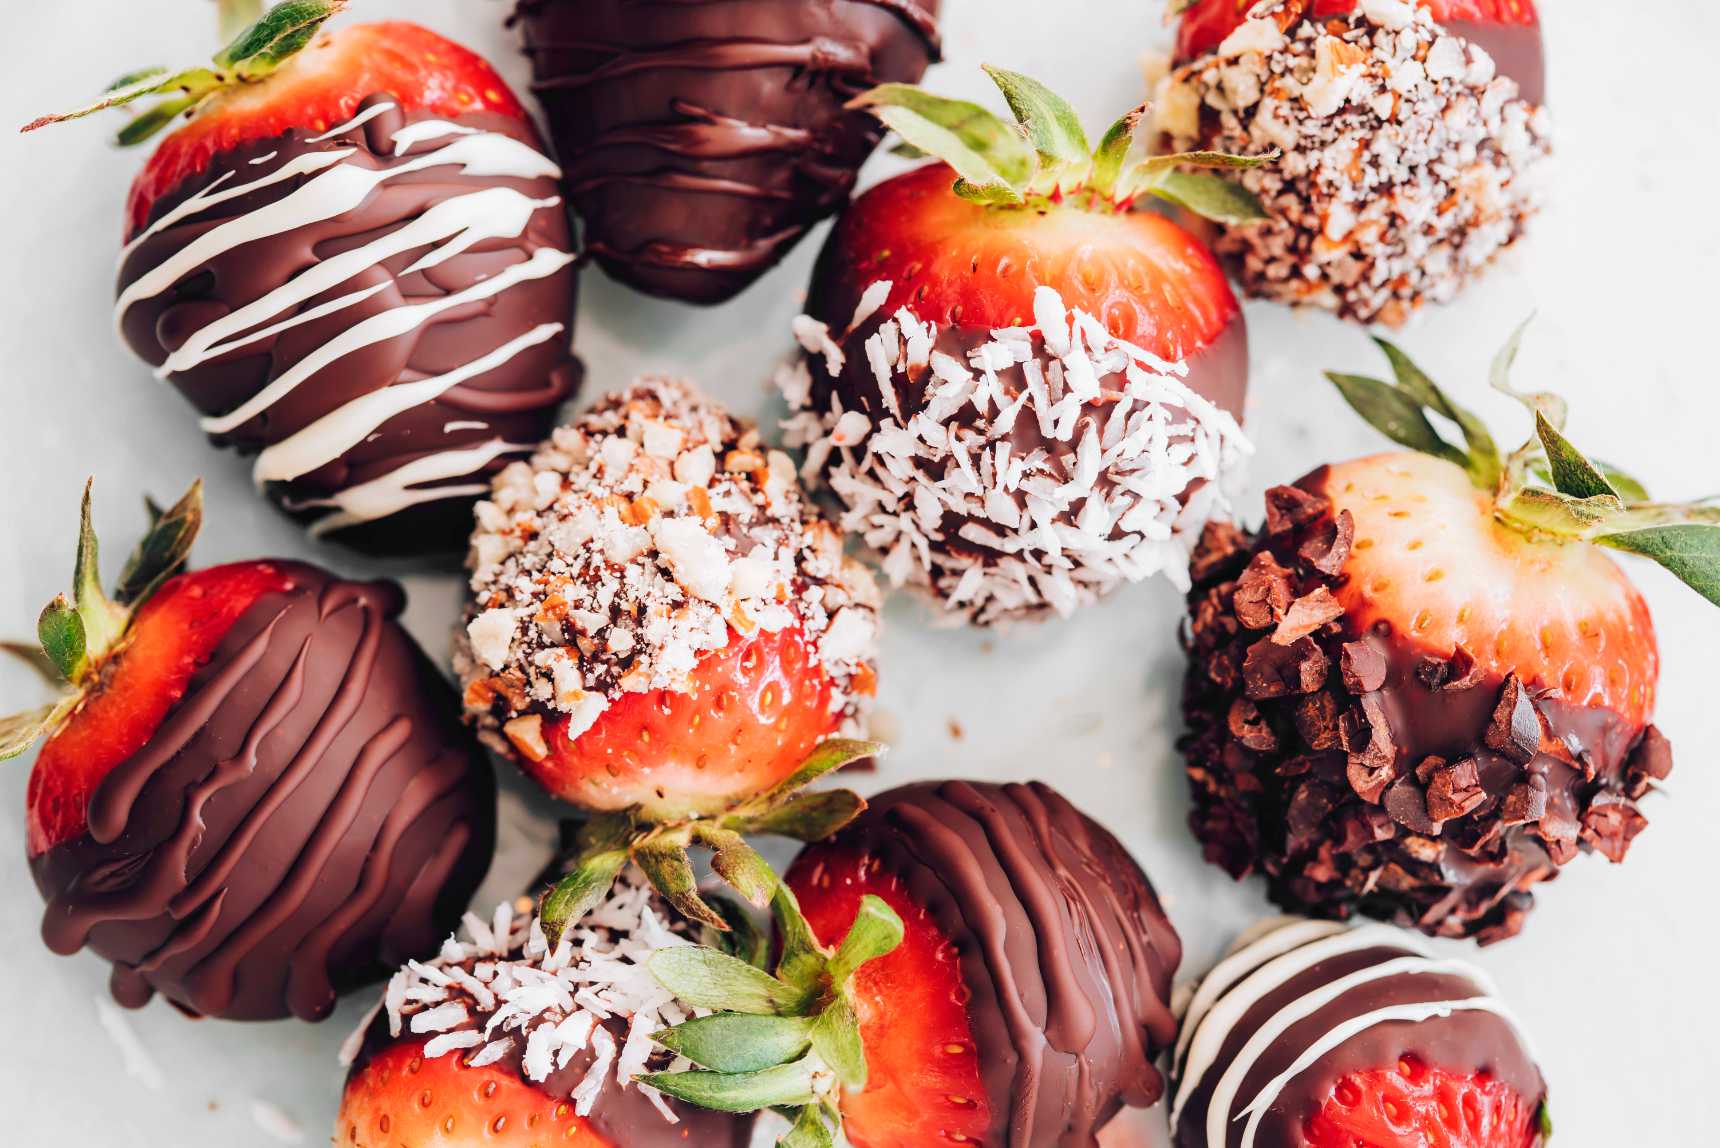 10 Vegan Chocolate Covered Strawberries with different crunchy coatings